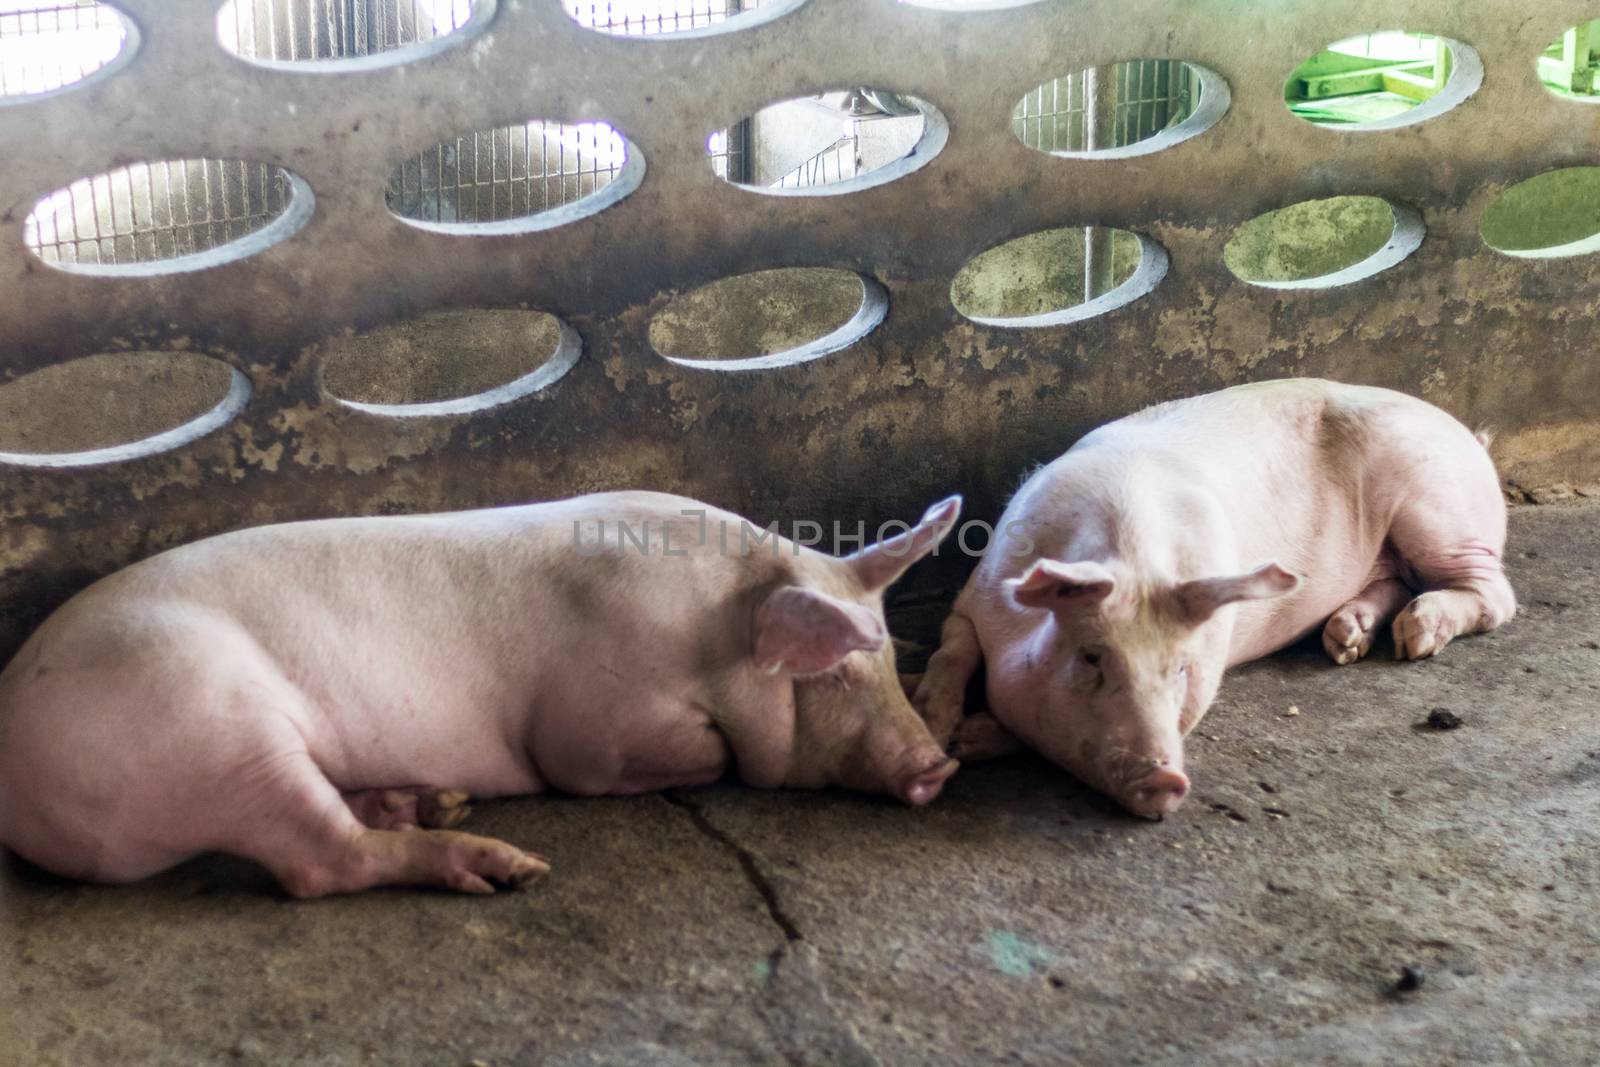 The fat pig is sleeping after eating a meal at the pig farm. Pig farm, closed system to prevent odors and germs.